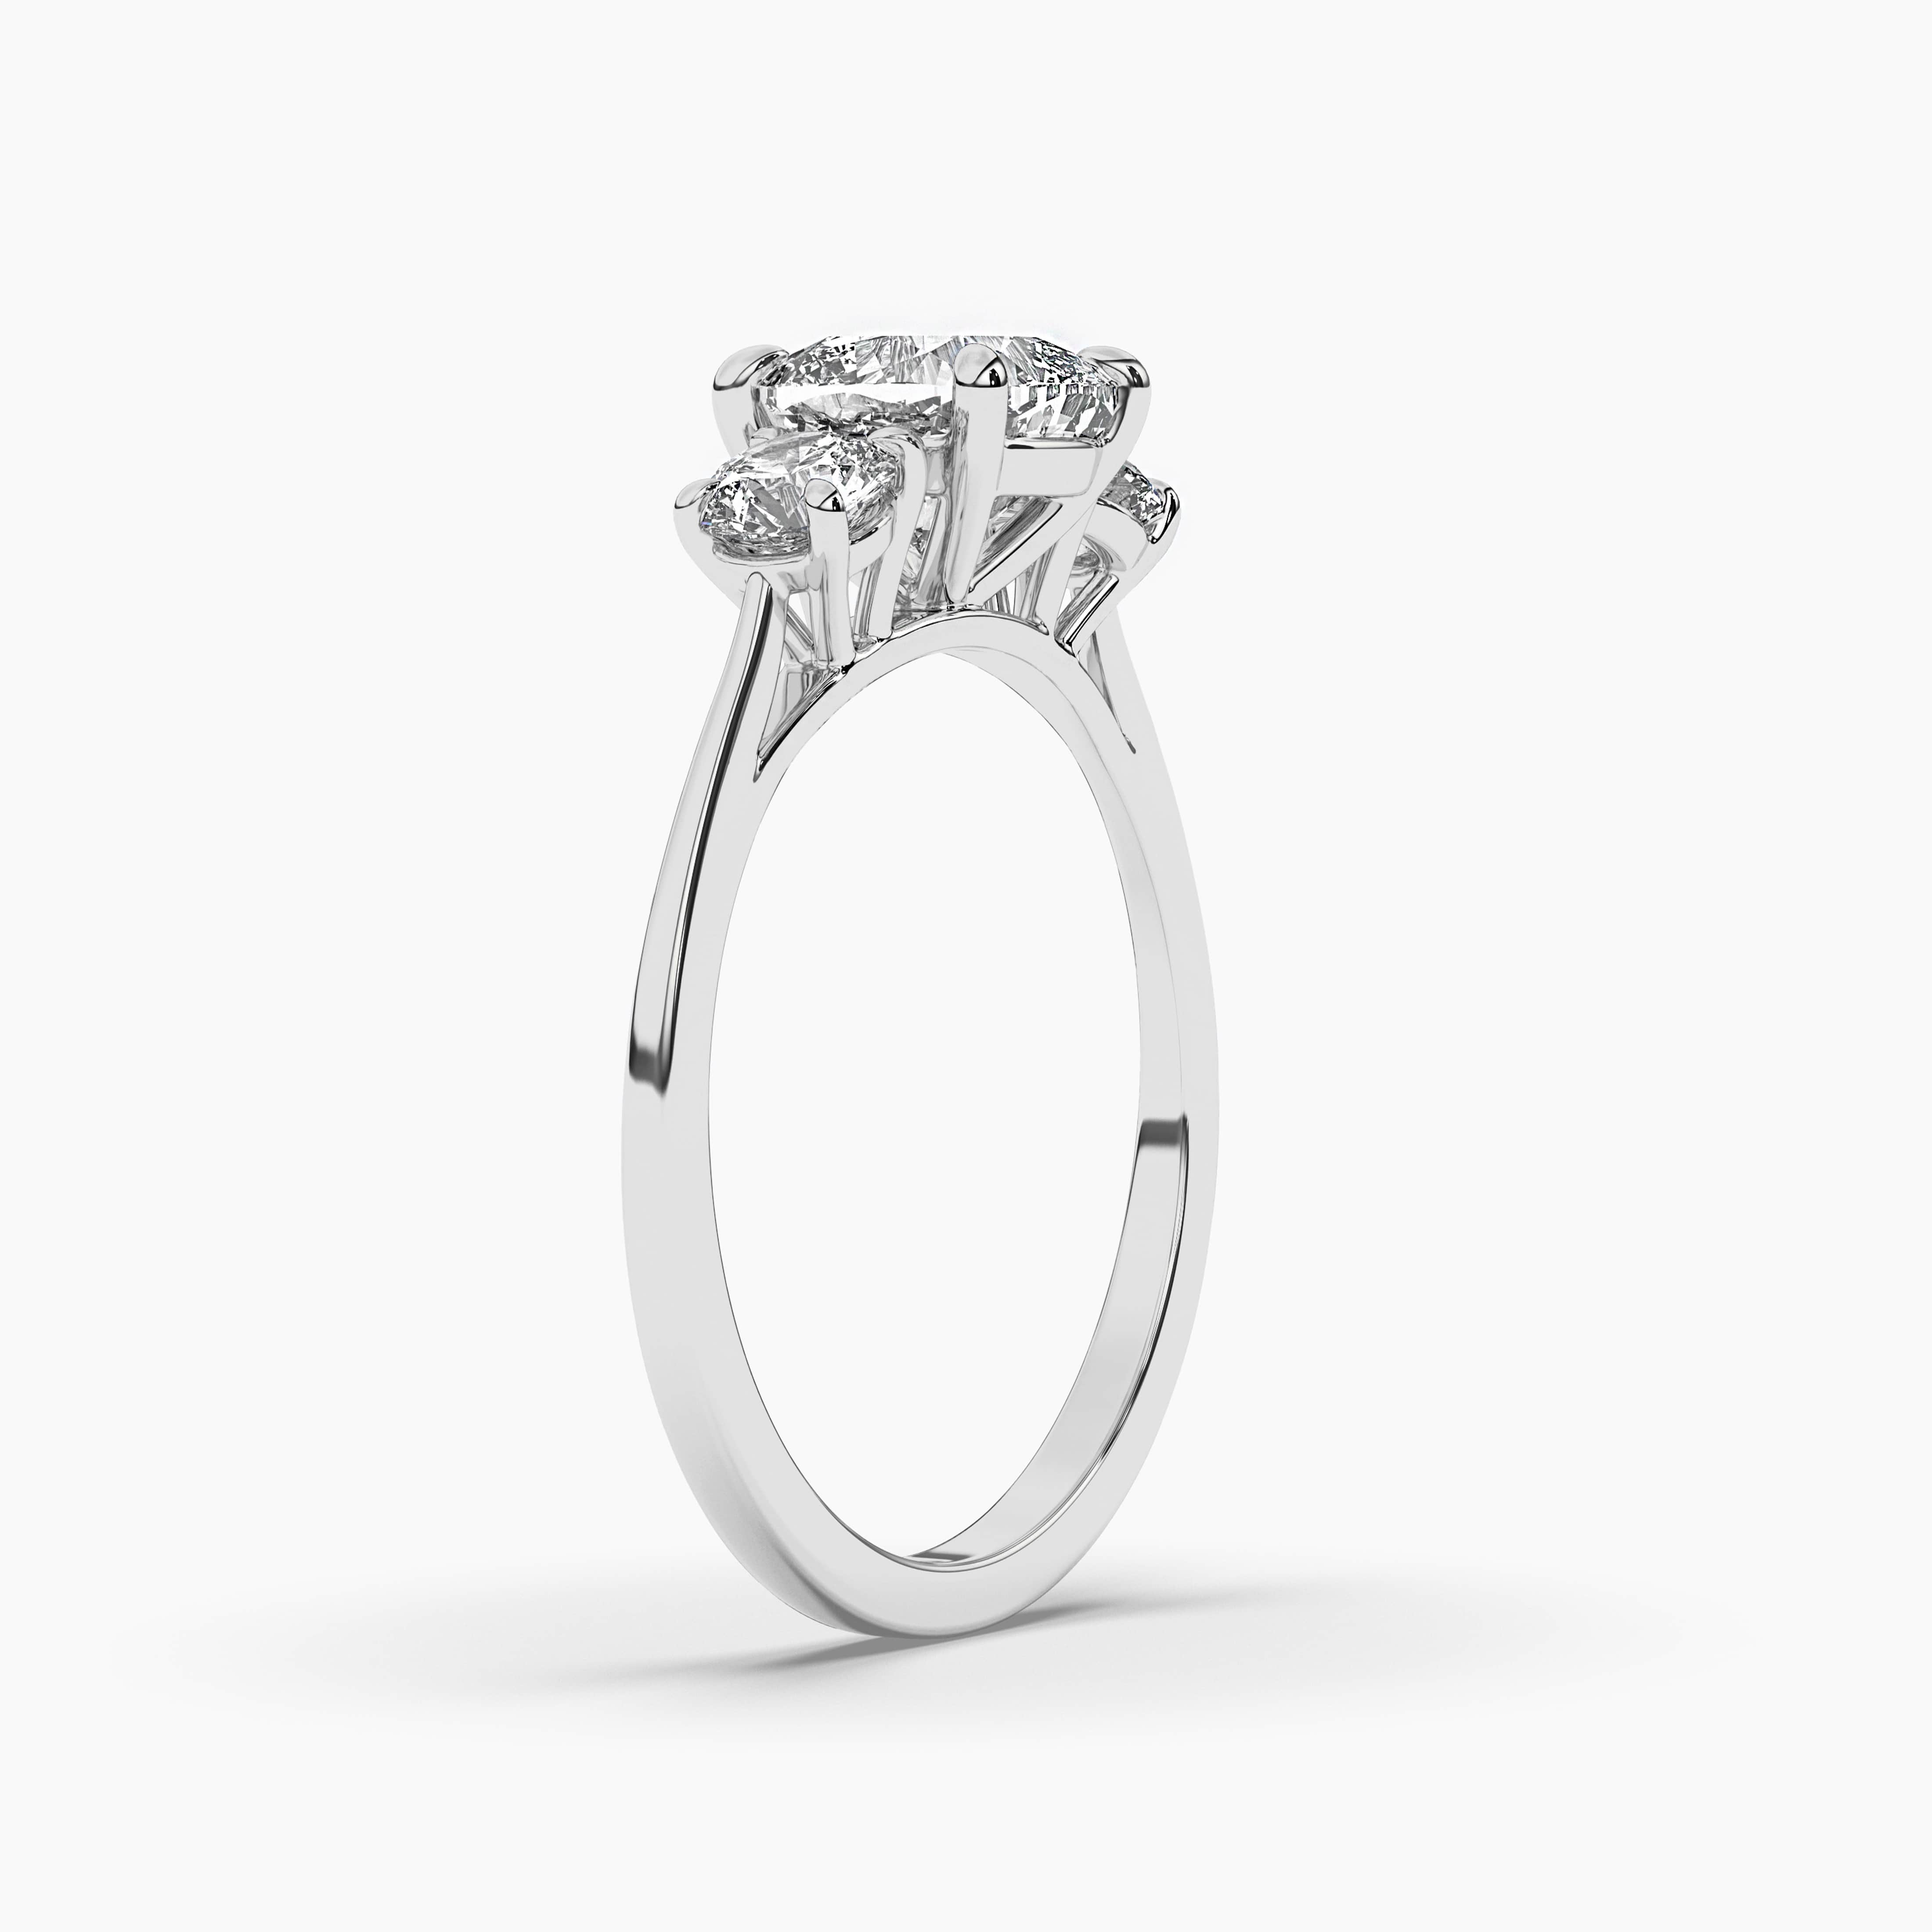 WHITE GOLD ENGAGEMENT AND WADDING RING